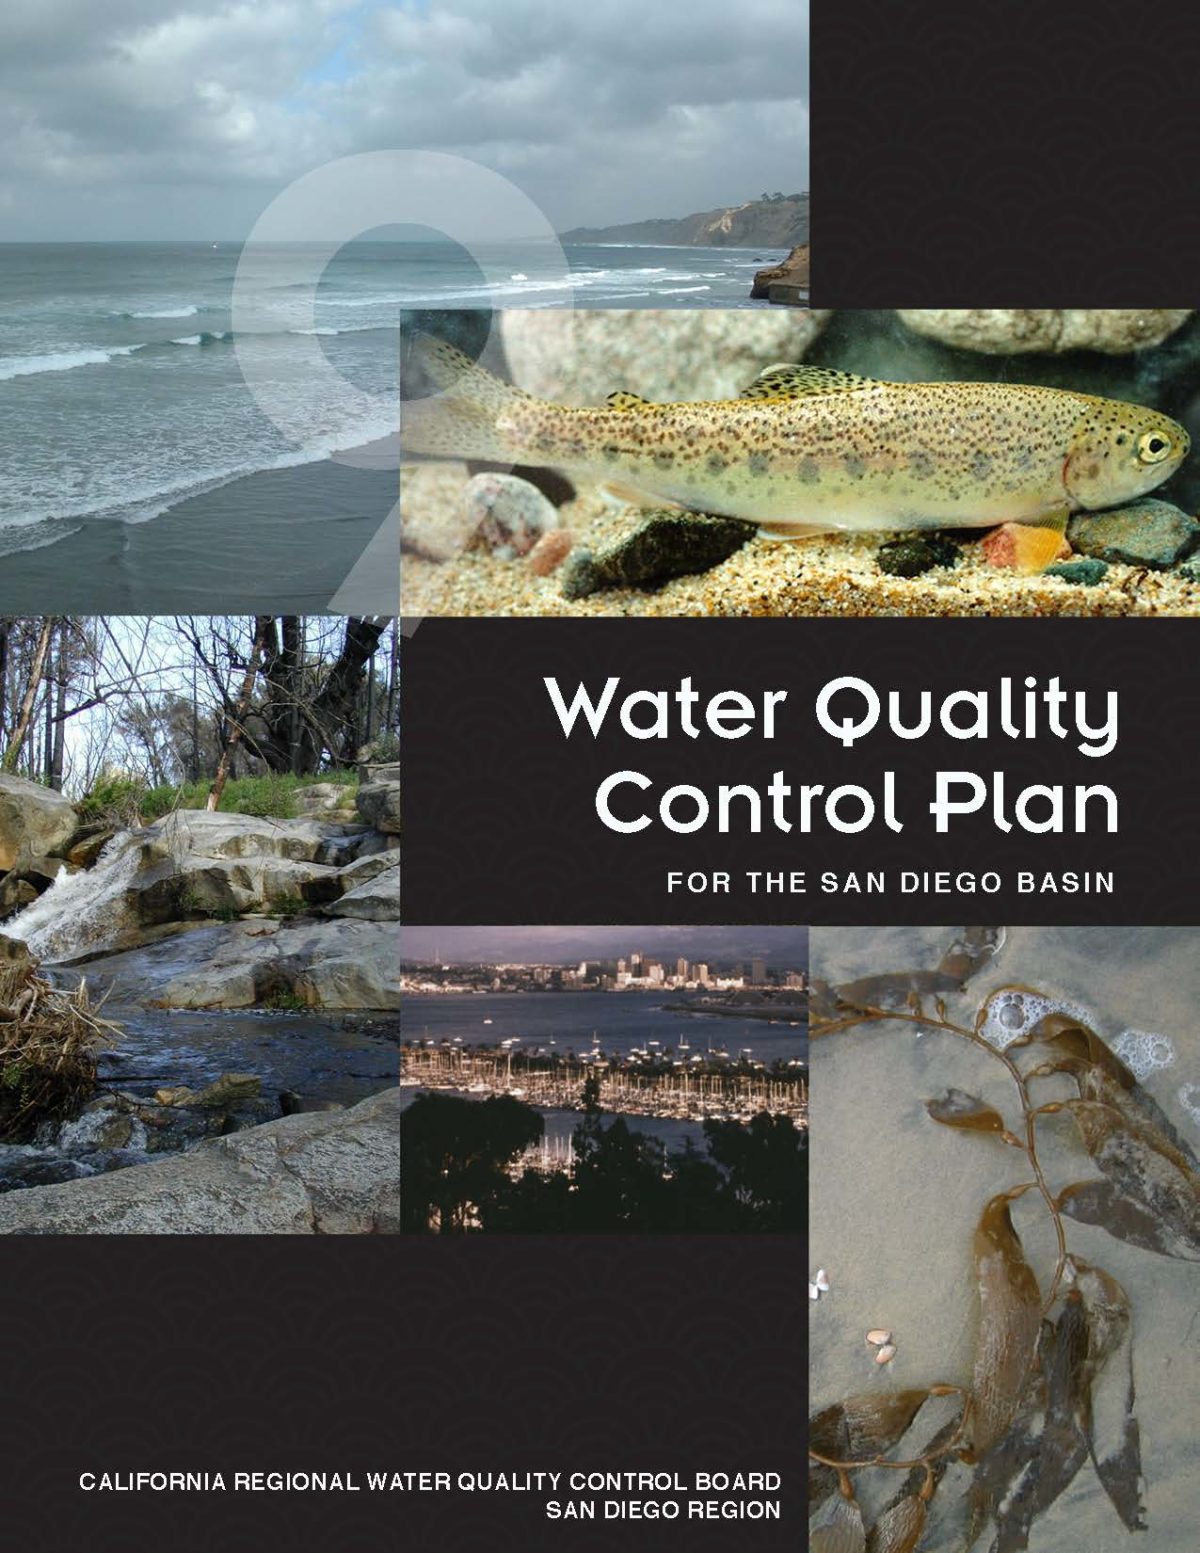 Water Quality Control Plan for the San Diego region